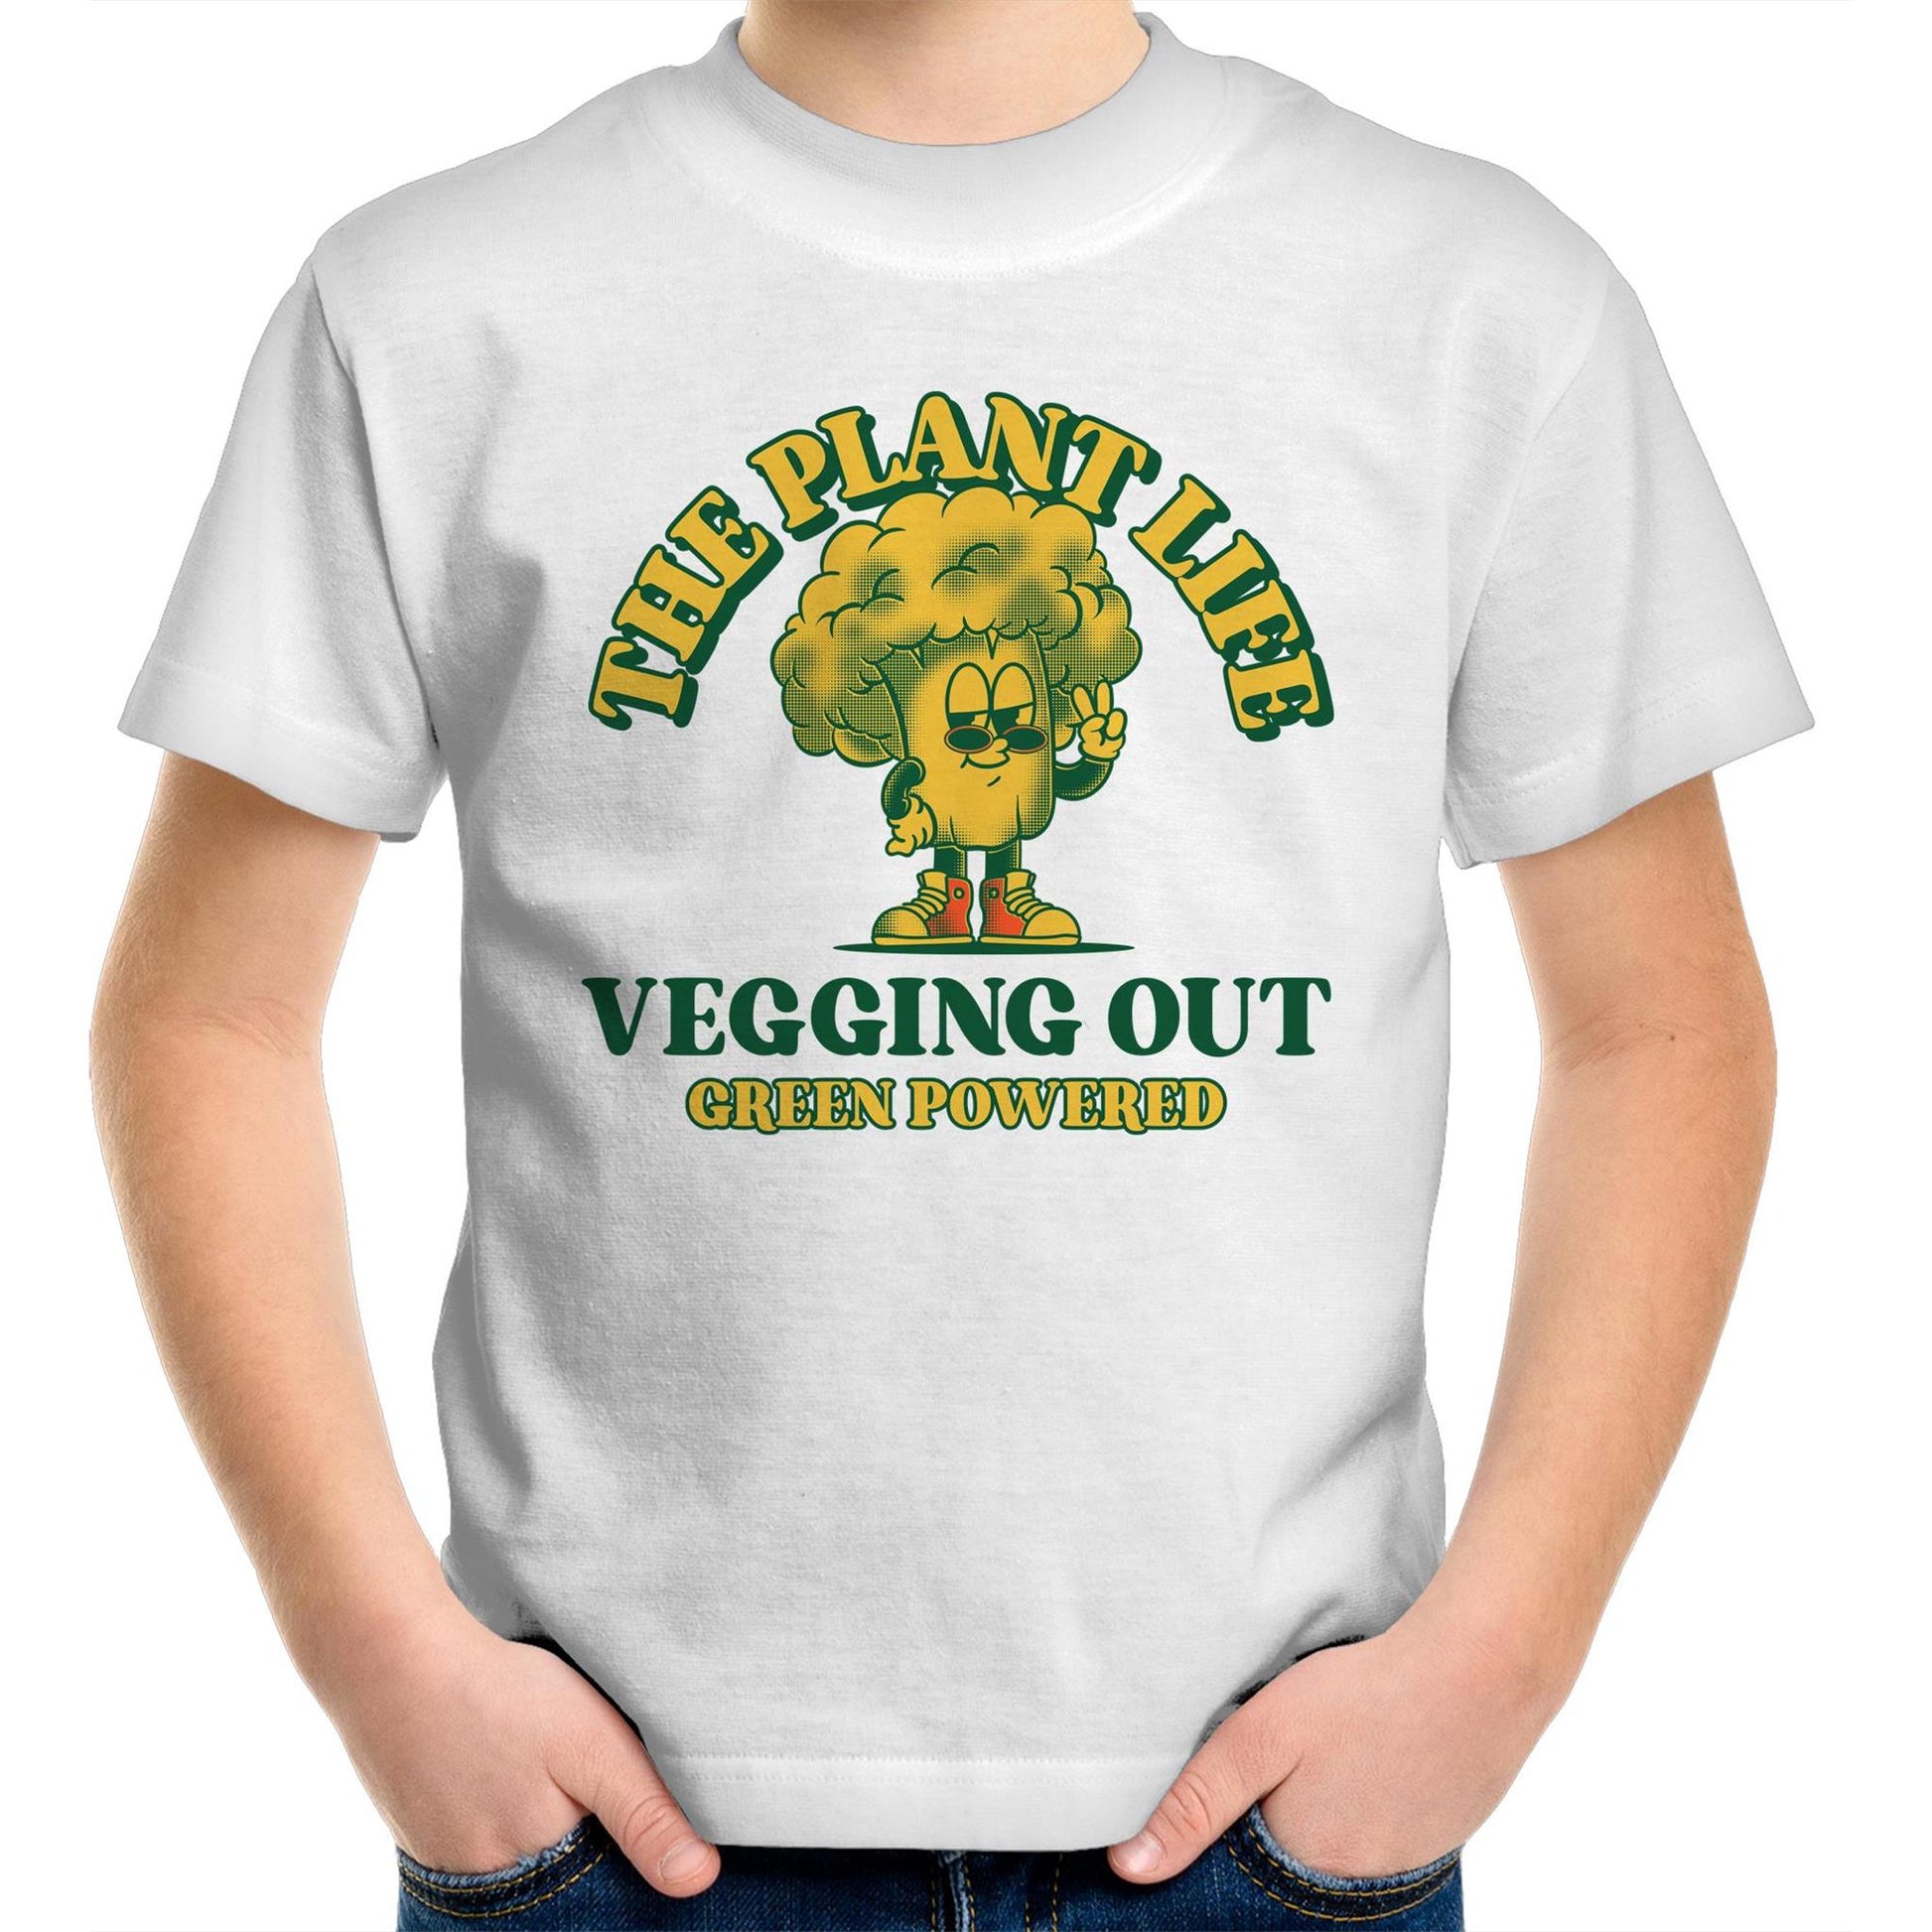 The Plant Life - Kids Youth T-Shirt White Kids Youth T-shirt Food Vegetarian